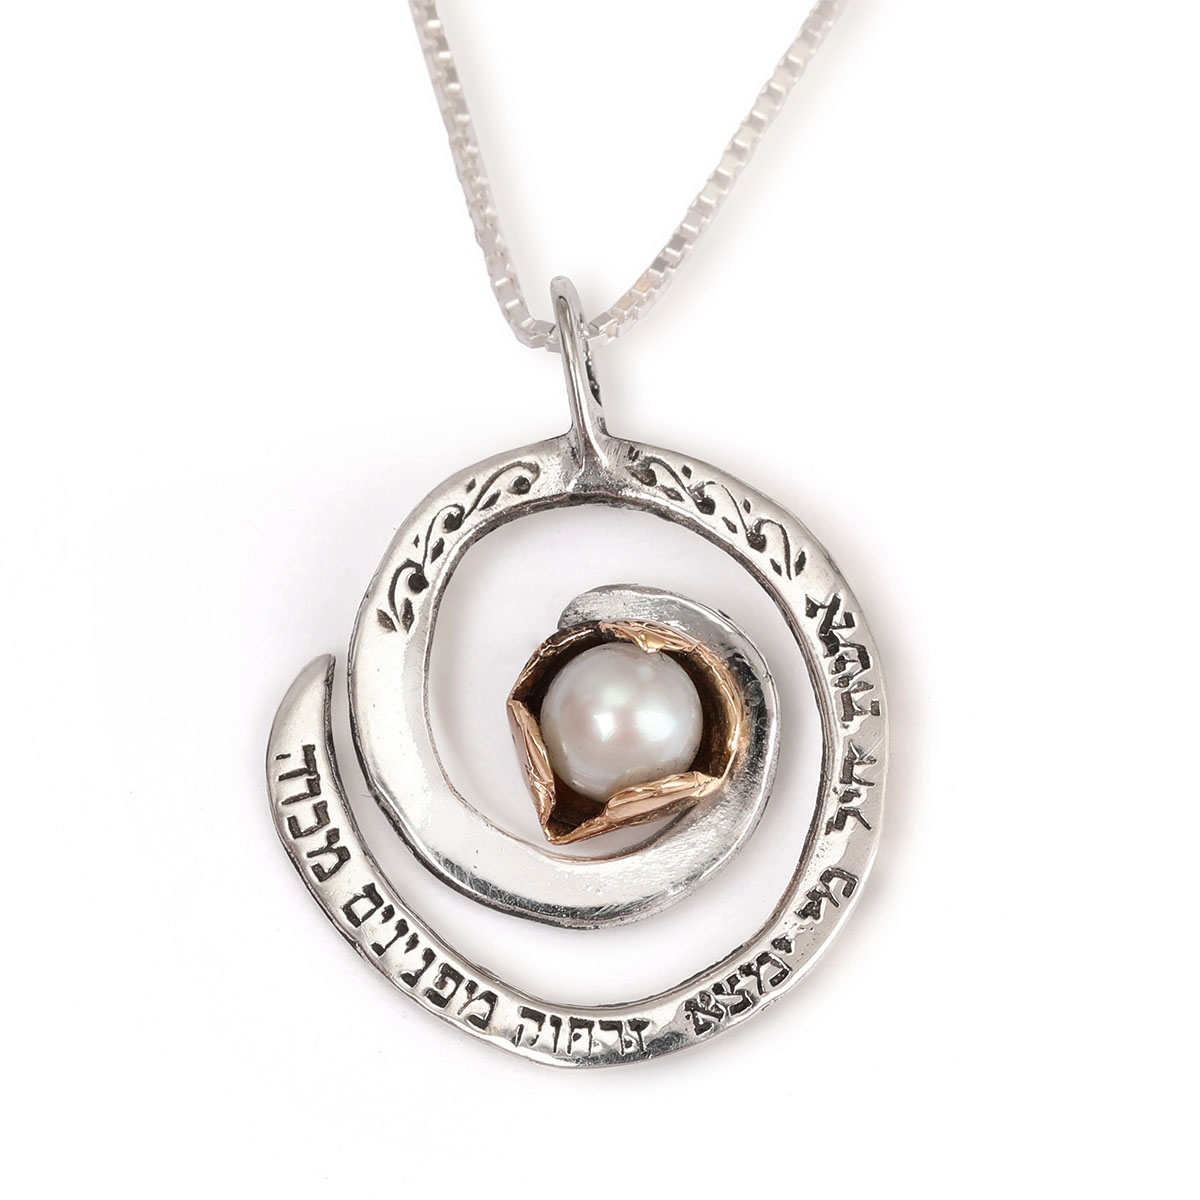  Sterling Silver and 9k Gold Woman of Valor Necklace with Pearl - Proverbs 31:10 - 1